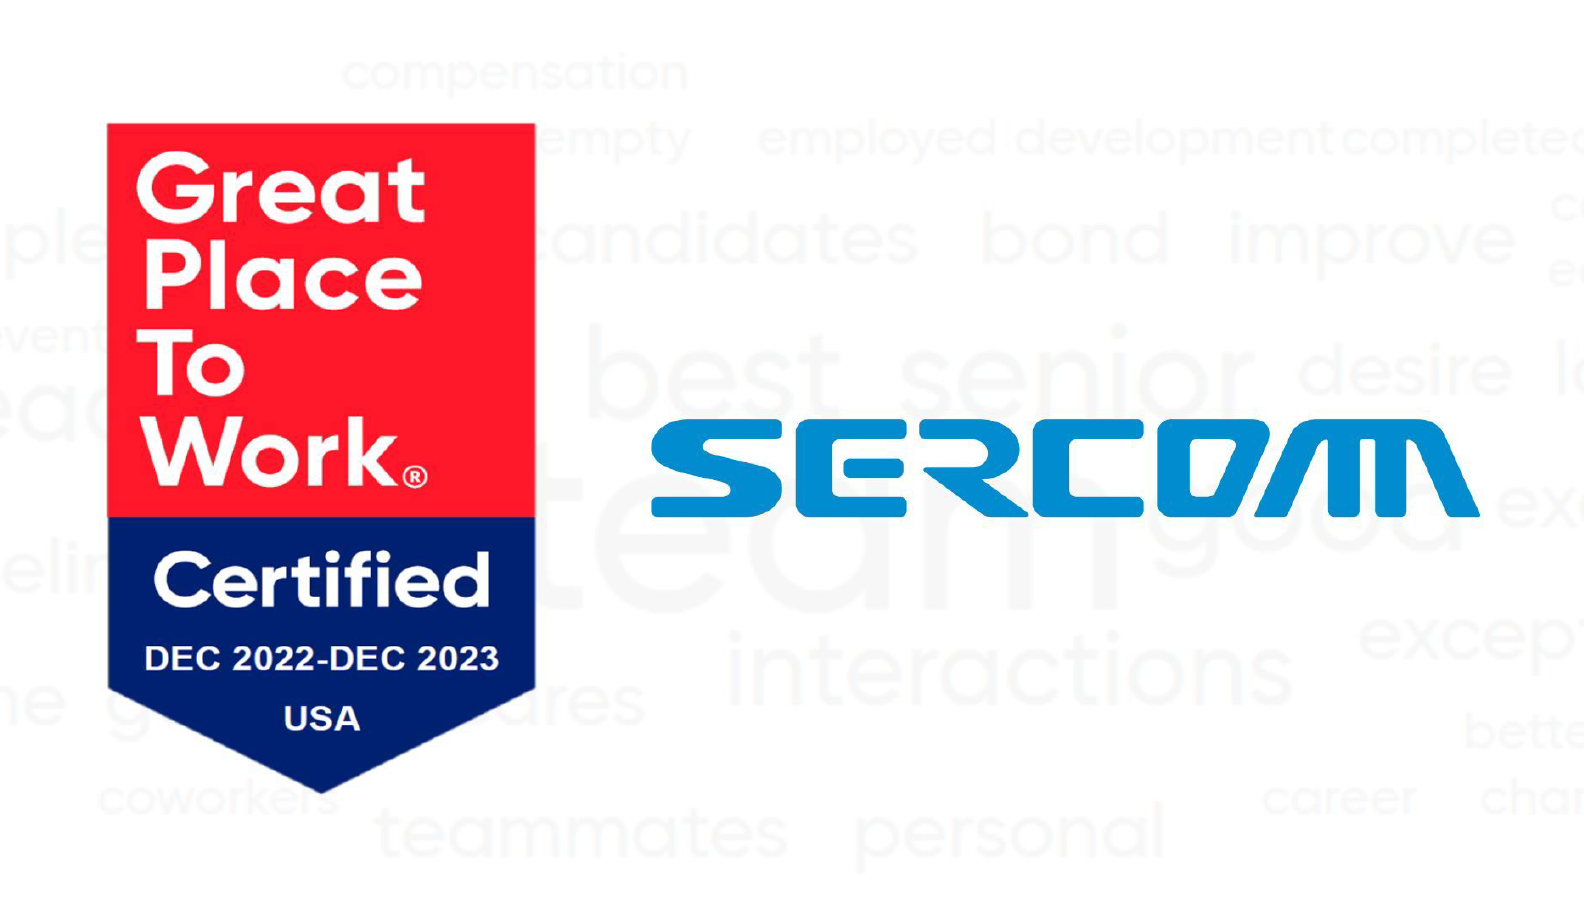 Awarded “Great Place To Work US”  Certification